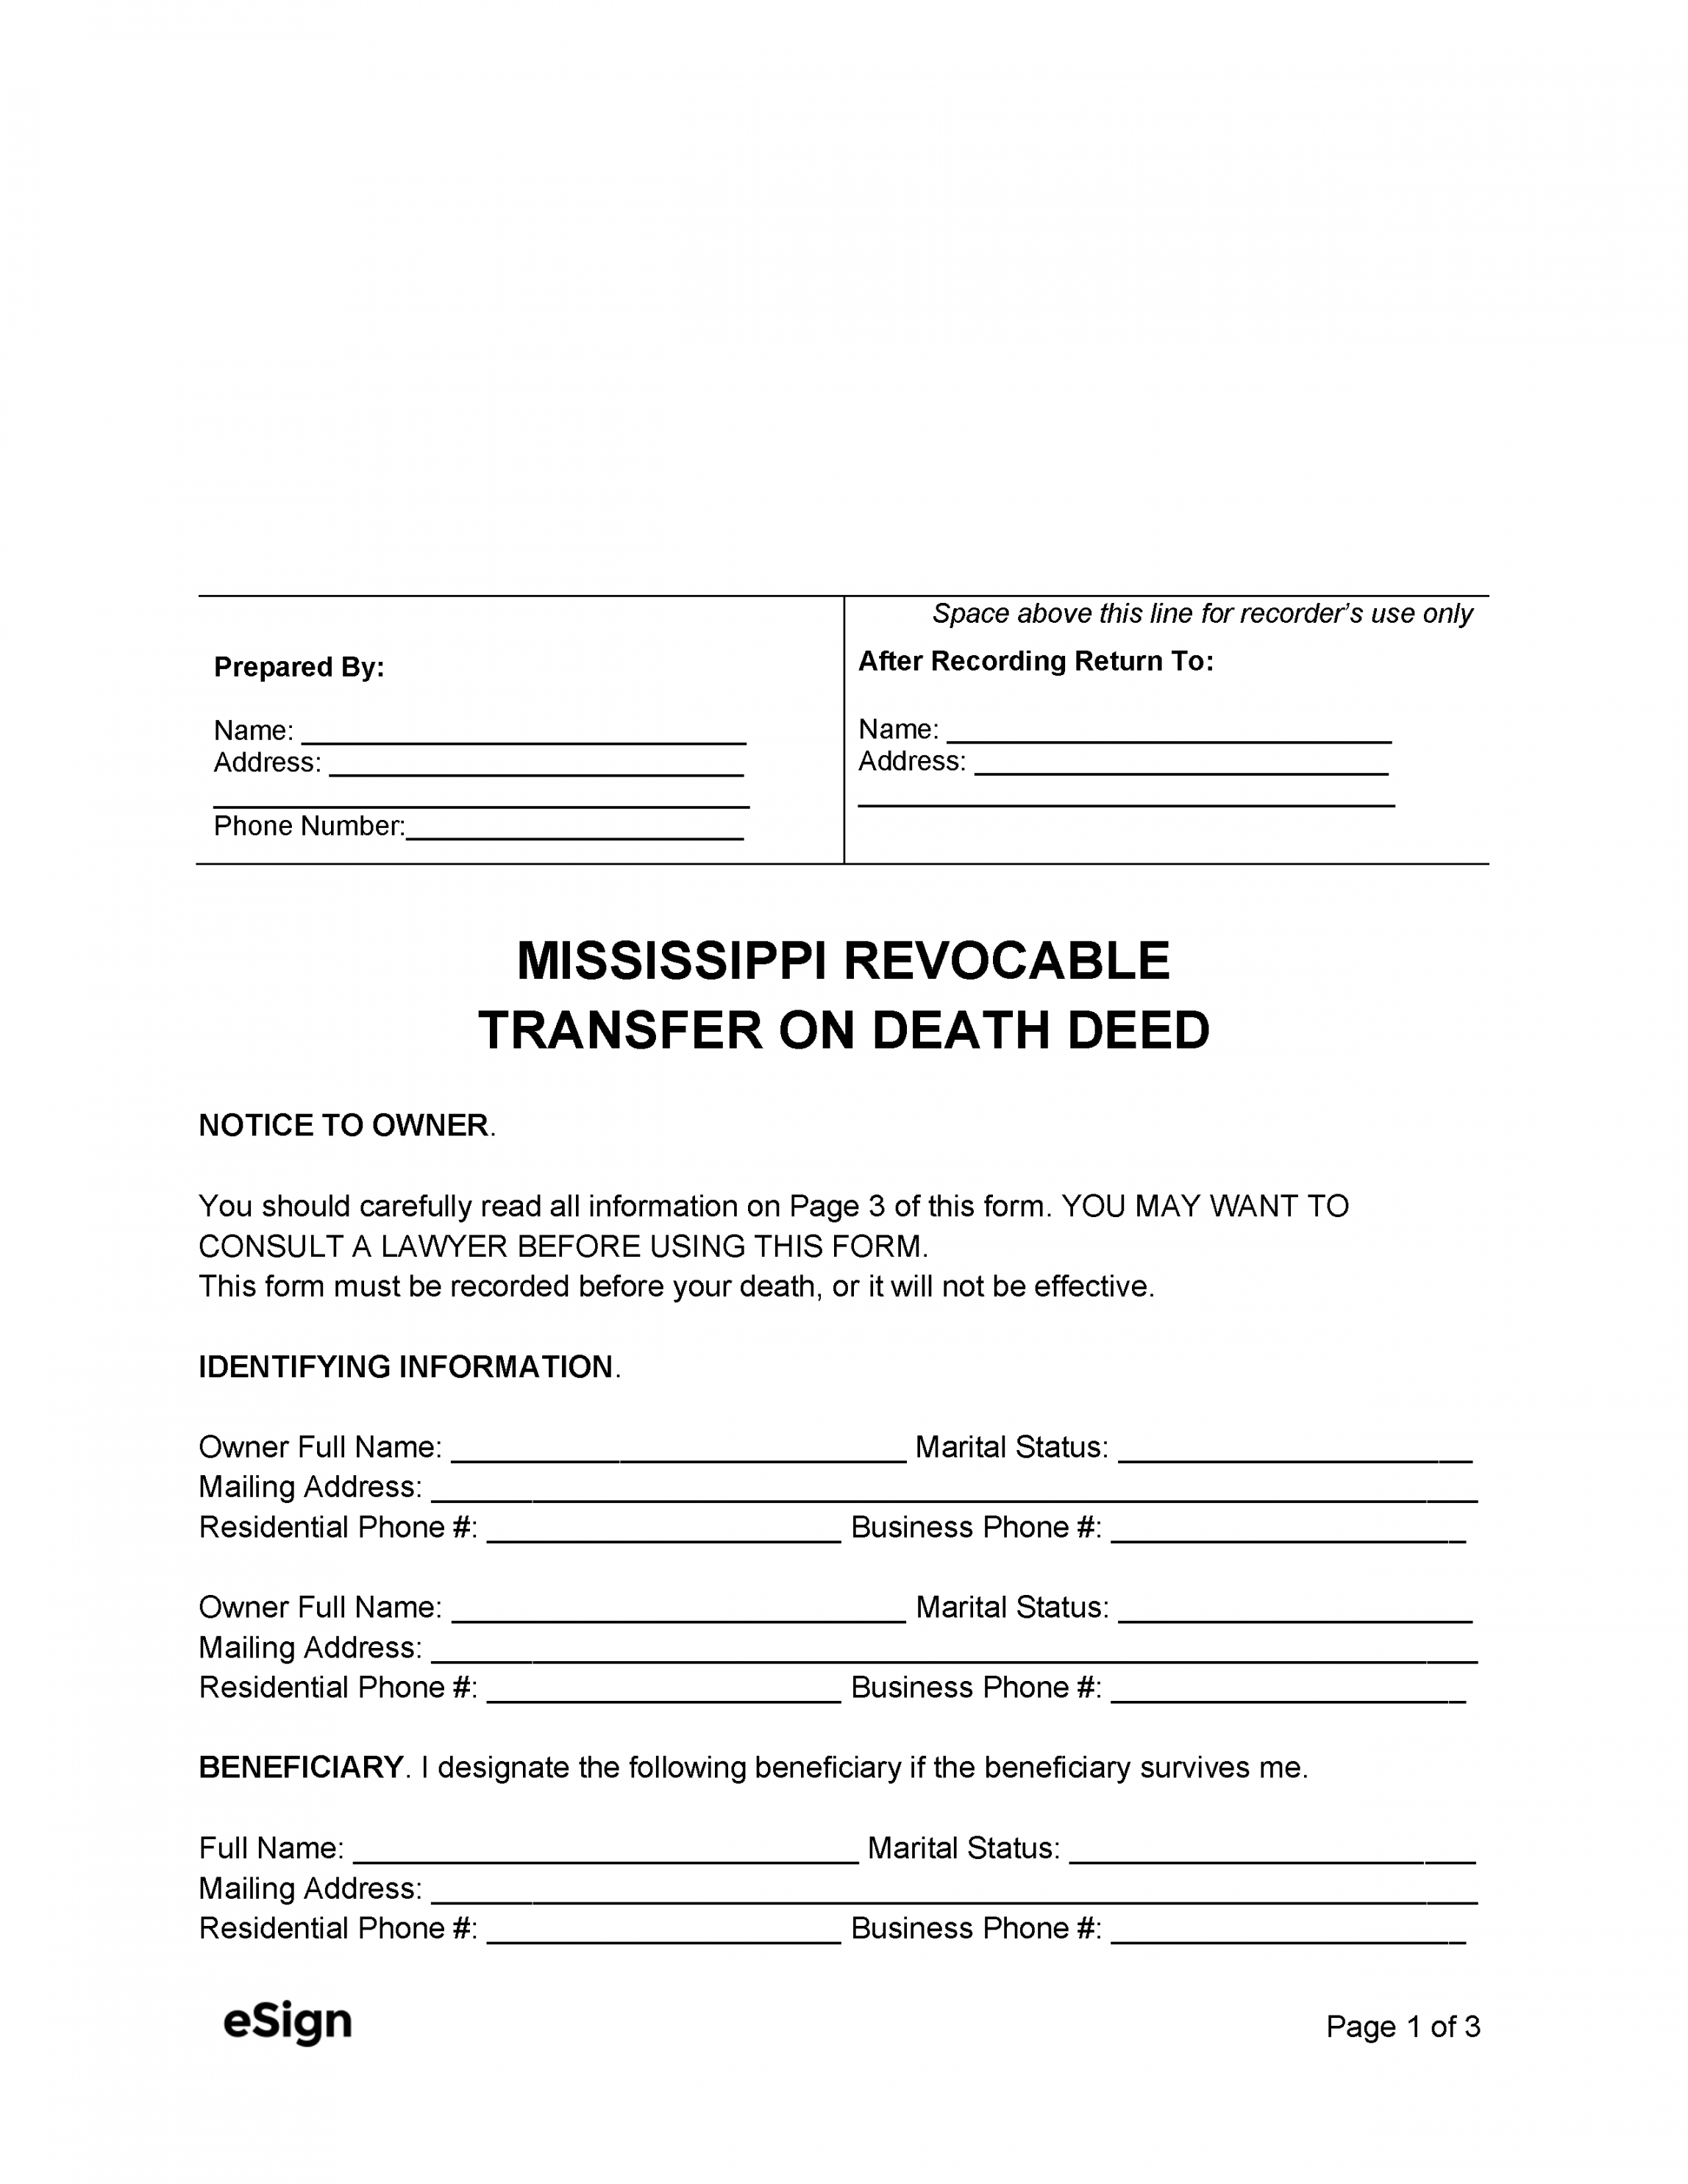 Free Mississippi Transfer on Death Deed Form  PDF  Word - FREE Printables - Free Printable Transfer On Death Deed Form